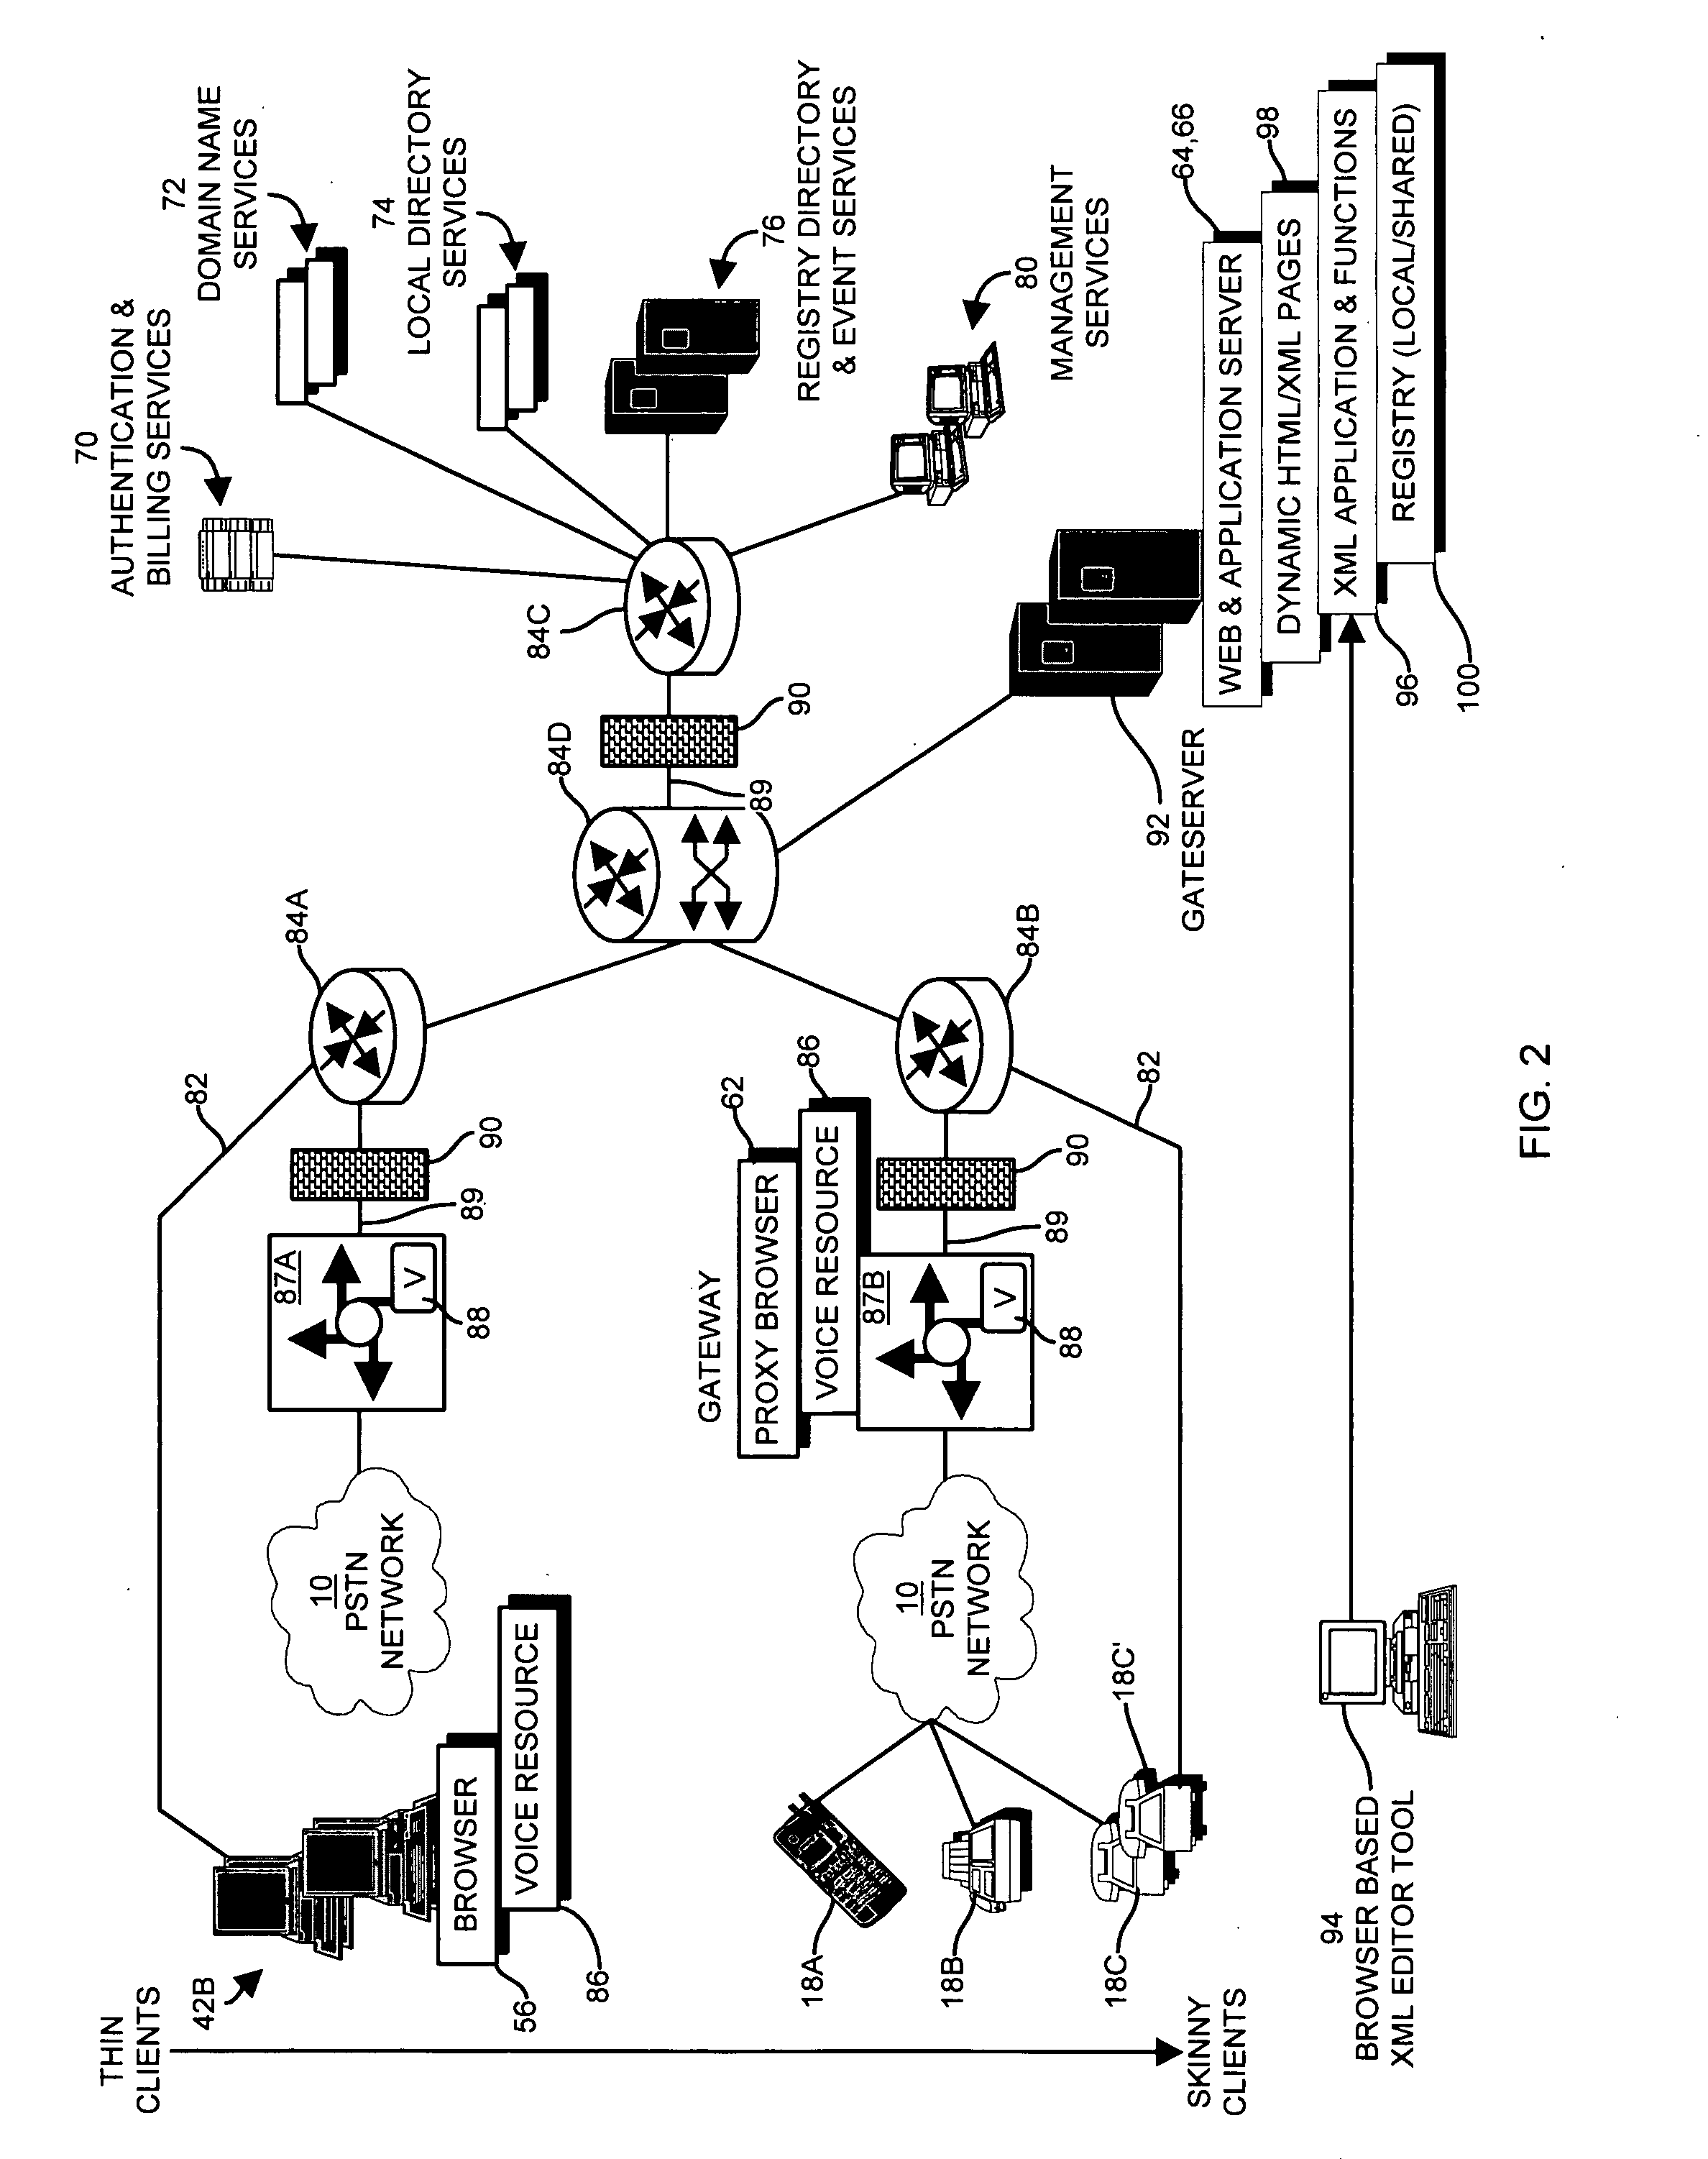 Apparatus and methods for providing network-based information suitable for audio output